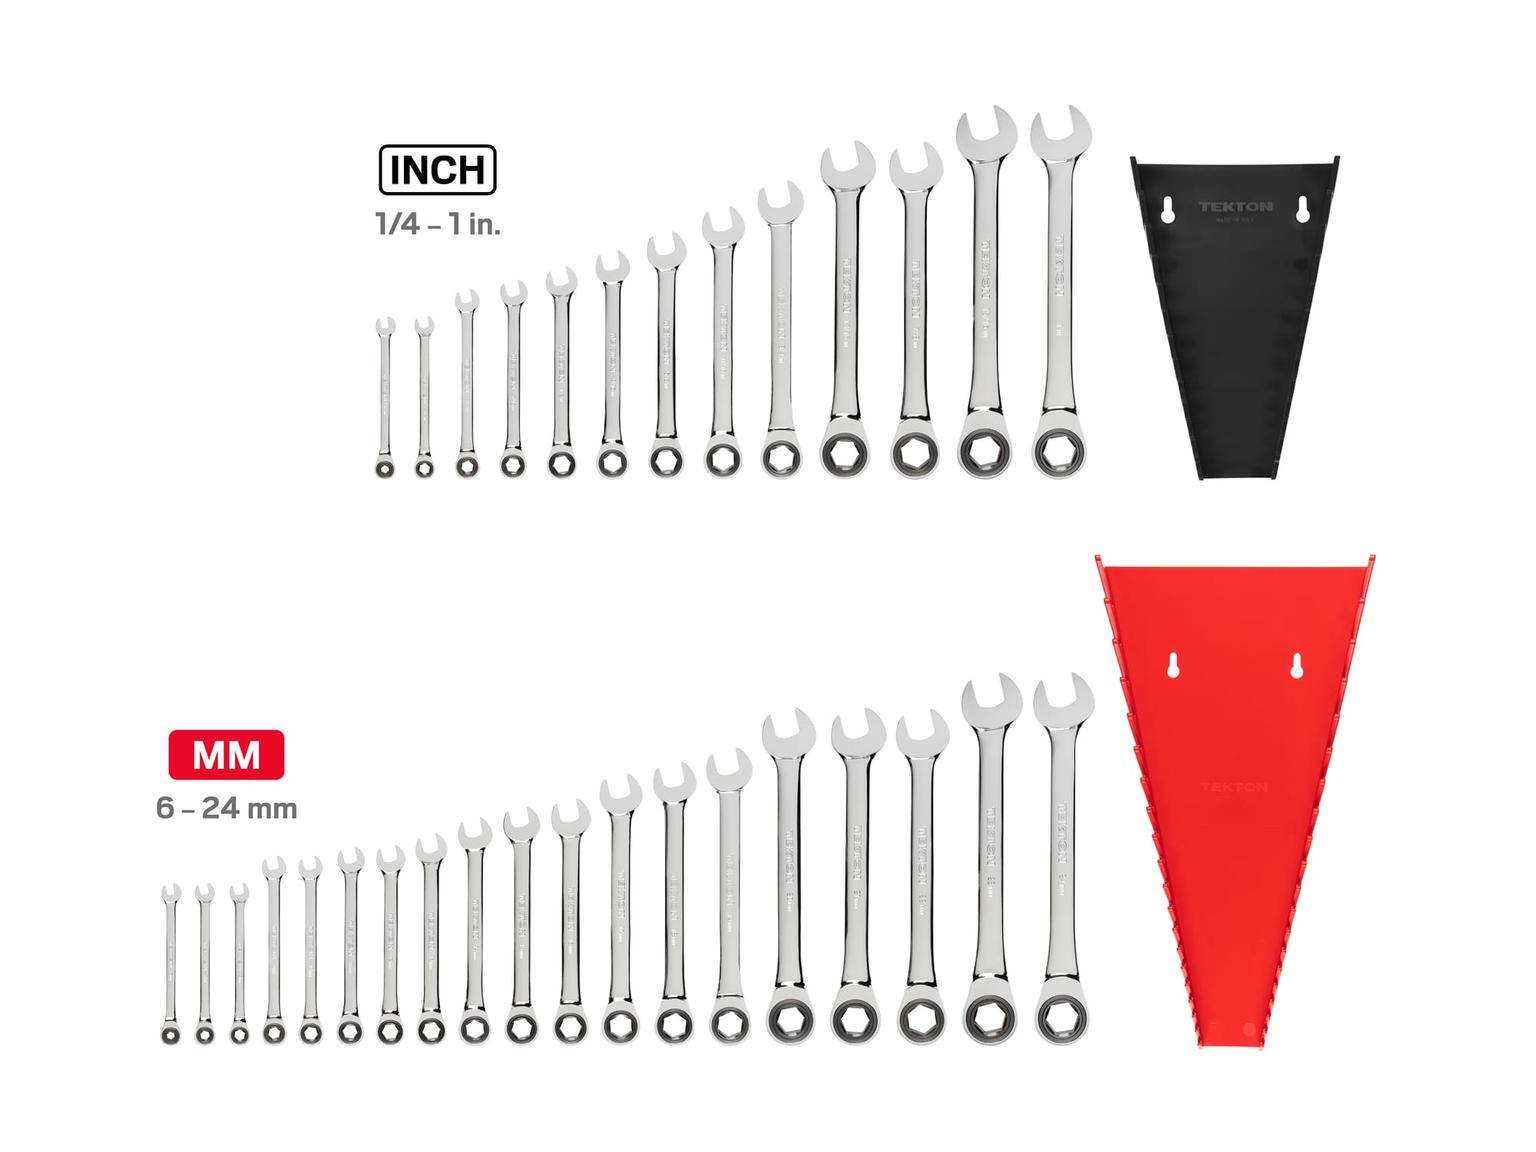 TEKTON WRN53341-T Ratcheting Combination Wrench Set with Rack, 32-Piece (1/4-1 in., 6-24 mm)